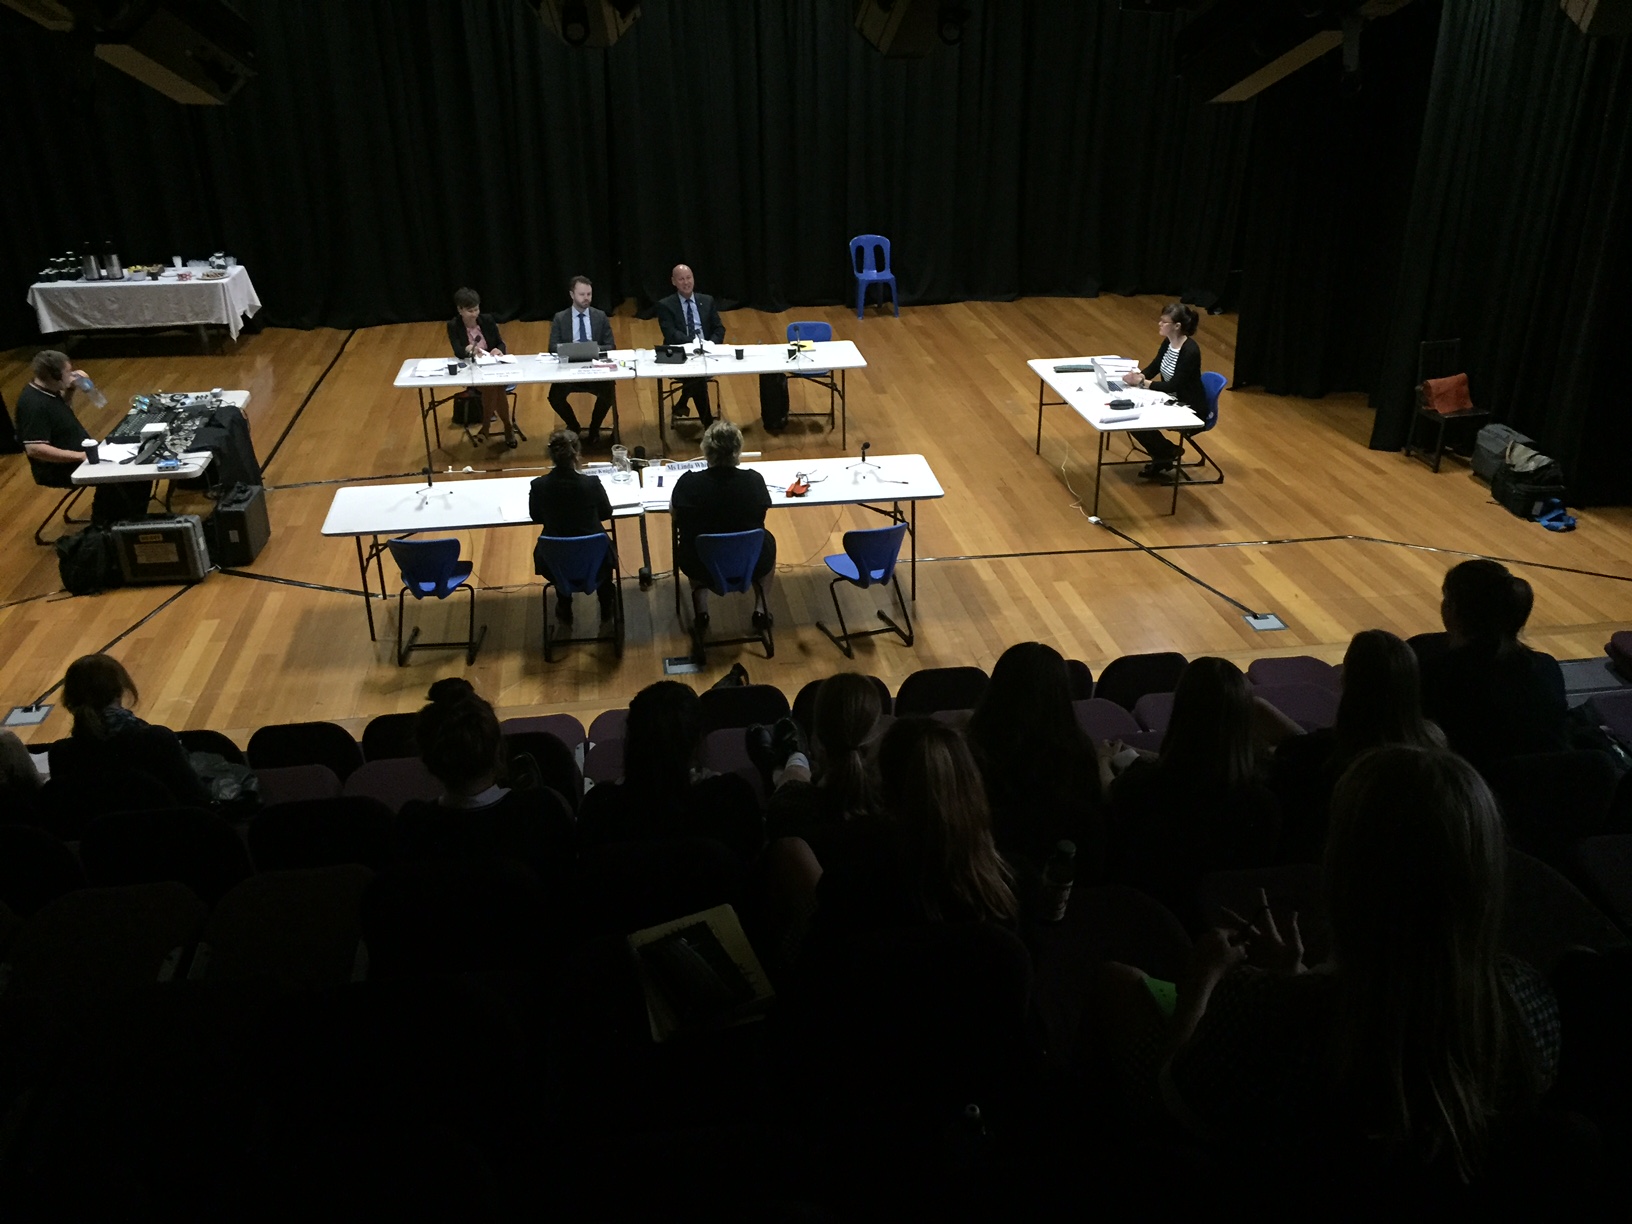 Students from Melbourne Girls' College (Richmond, Vic) observing the public hearing held at their school on 18 February 2016. Facing camera L-R: Senator Jenny McAllister, Sean Turner [Acting Committee Secretary] and Senator Sean Edwards [Deputy Chair]. Witnesses L-R: Joanna Knight and Linda White from the Australian Services Union.